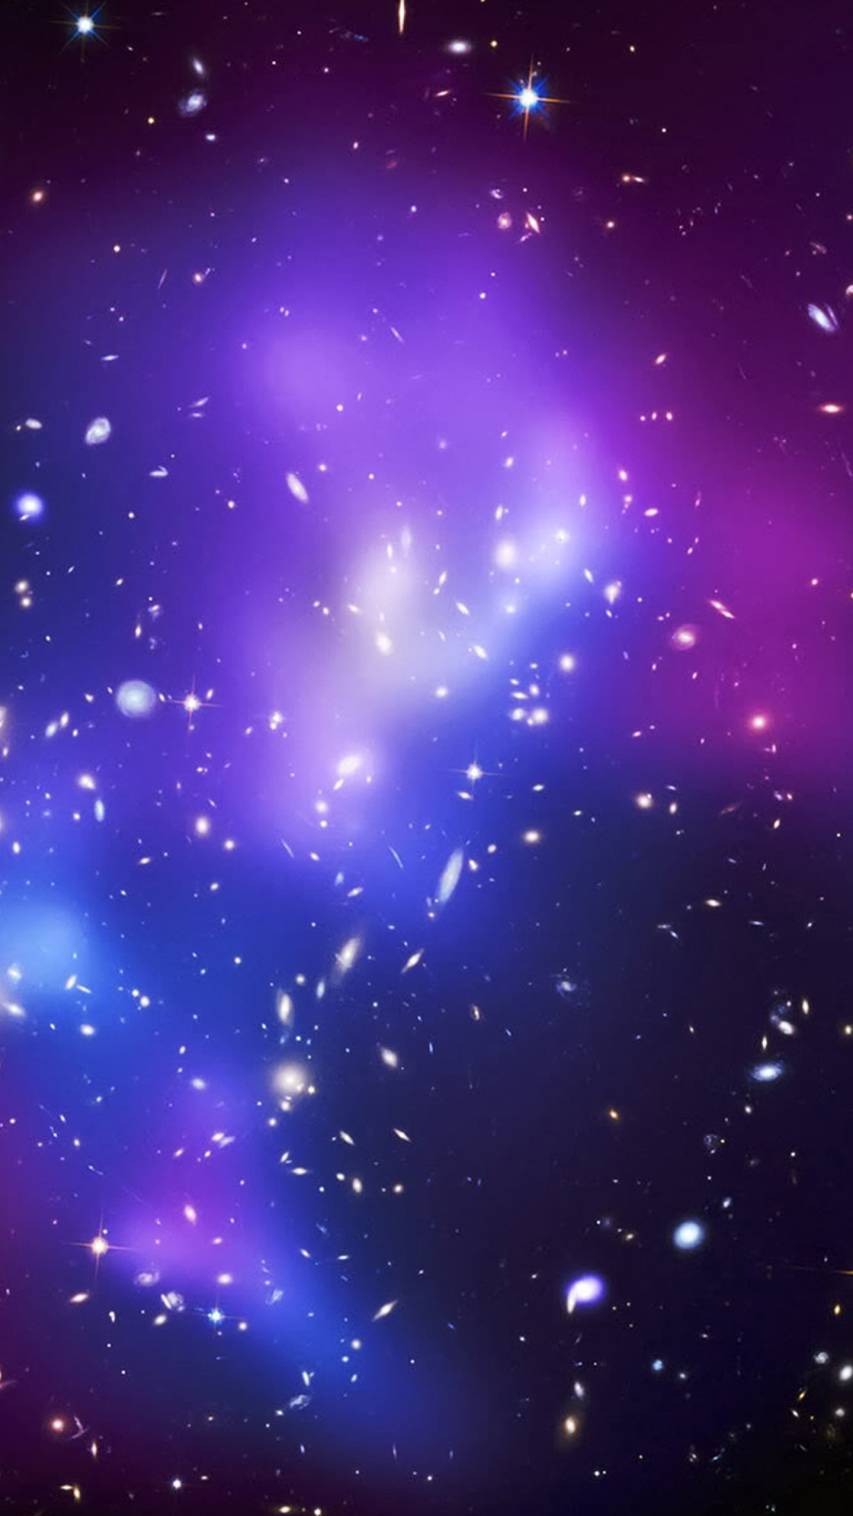 A purple and blue galaxy with stars - Galaxy